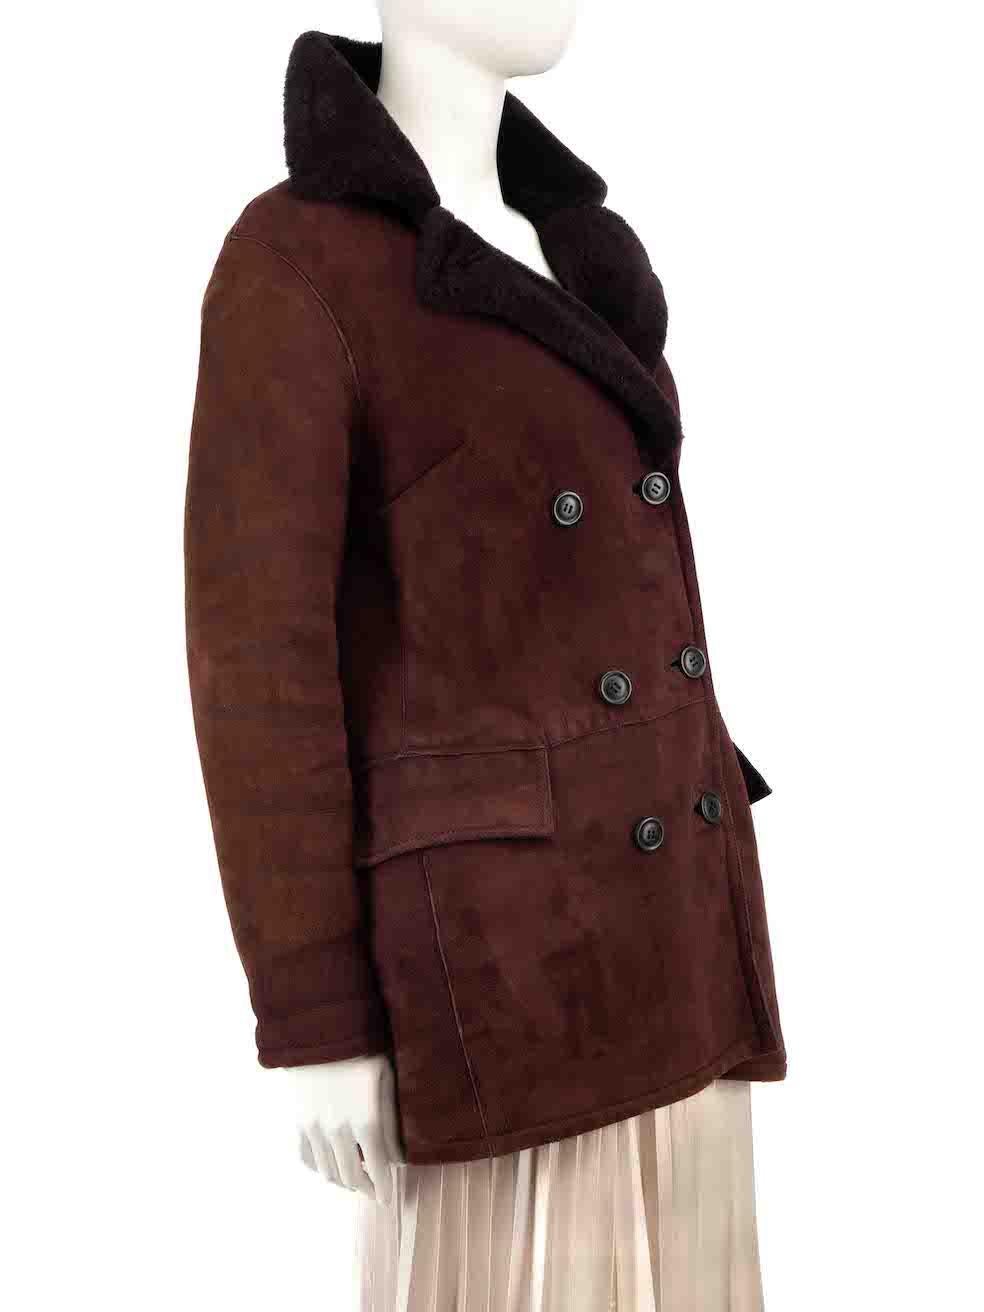 CONDITION is Good. General wear to coat is evident. Moderate signs of wear to the leather trims with loose threads and separation of the layers at the pockets on this used RRM designer resale item.
 
 
 
 Details
 
 
 Burgundy
 
 Suede
 
 Jacket
 
